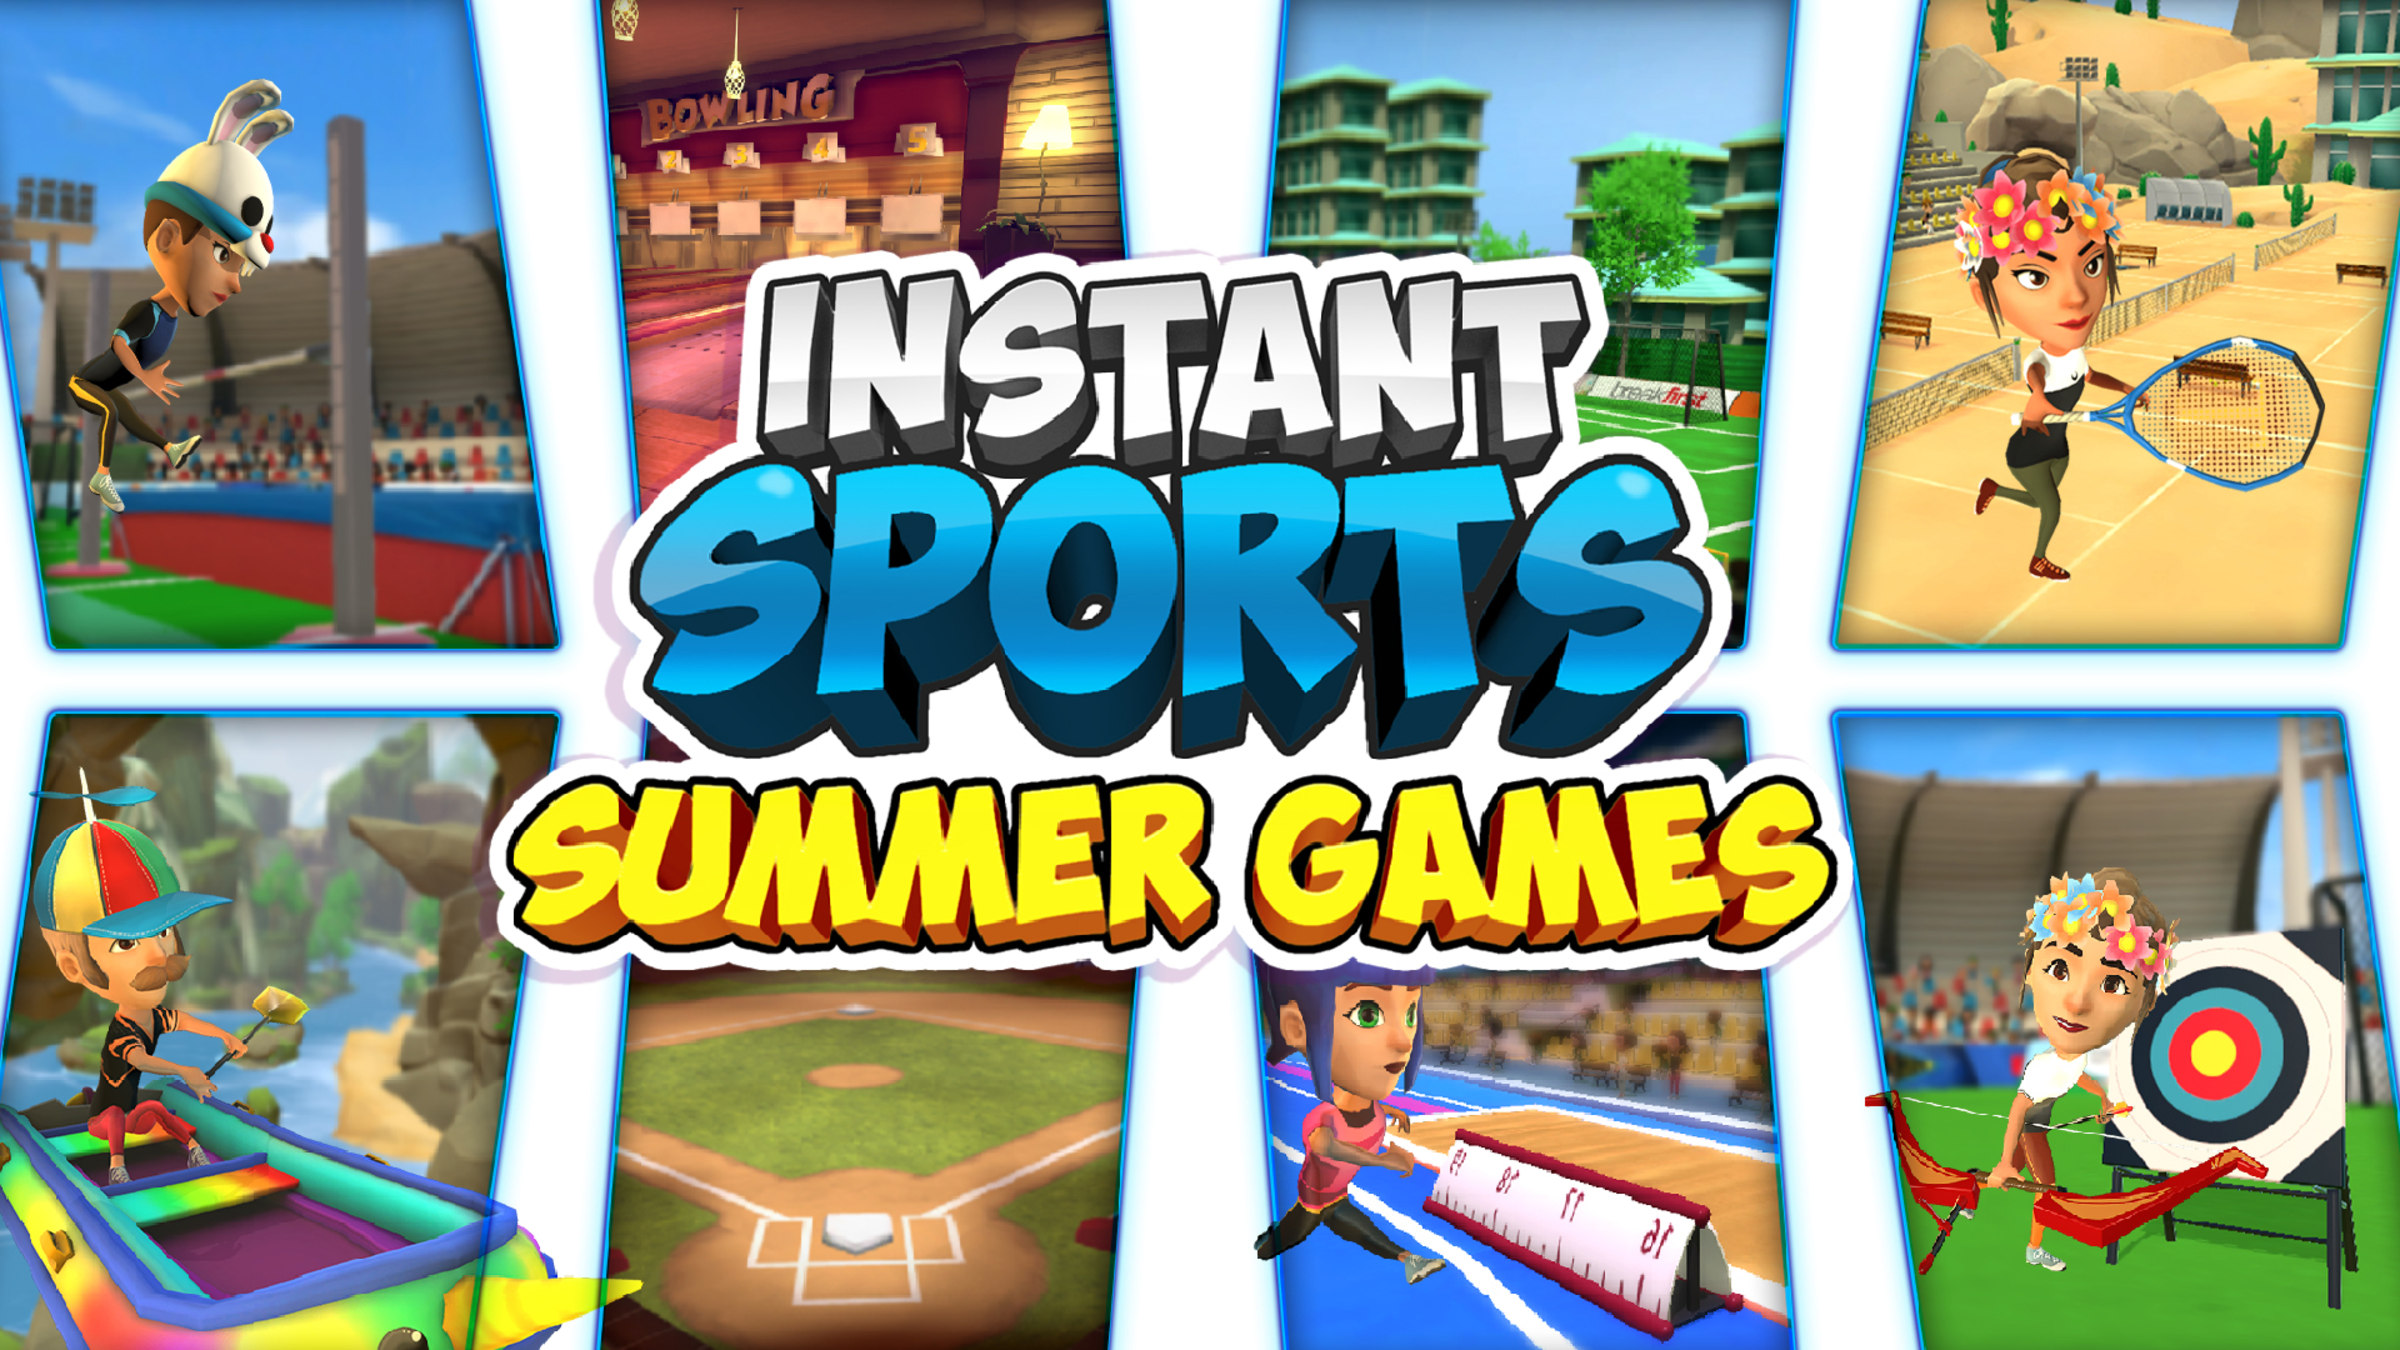 Instant Sports Summer Games for Nintendo Switch